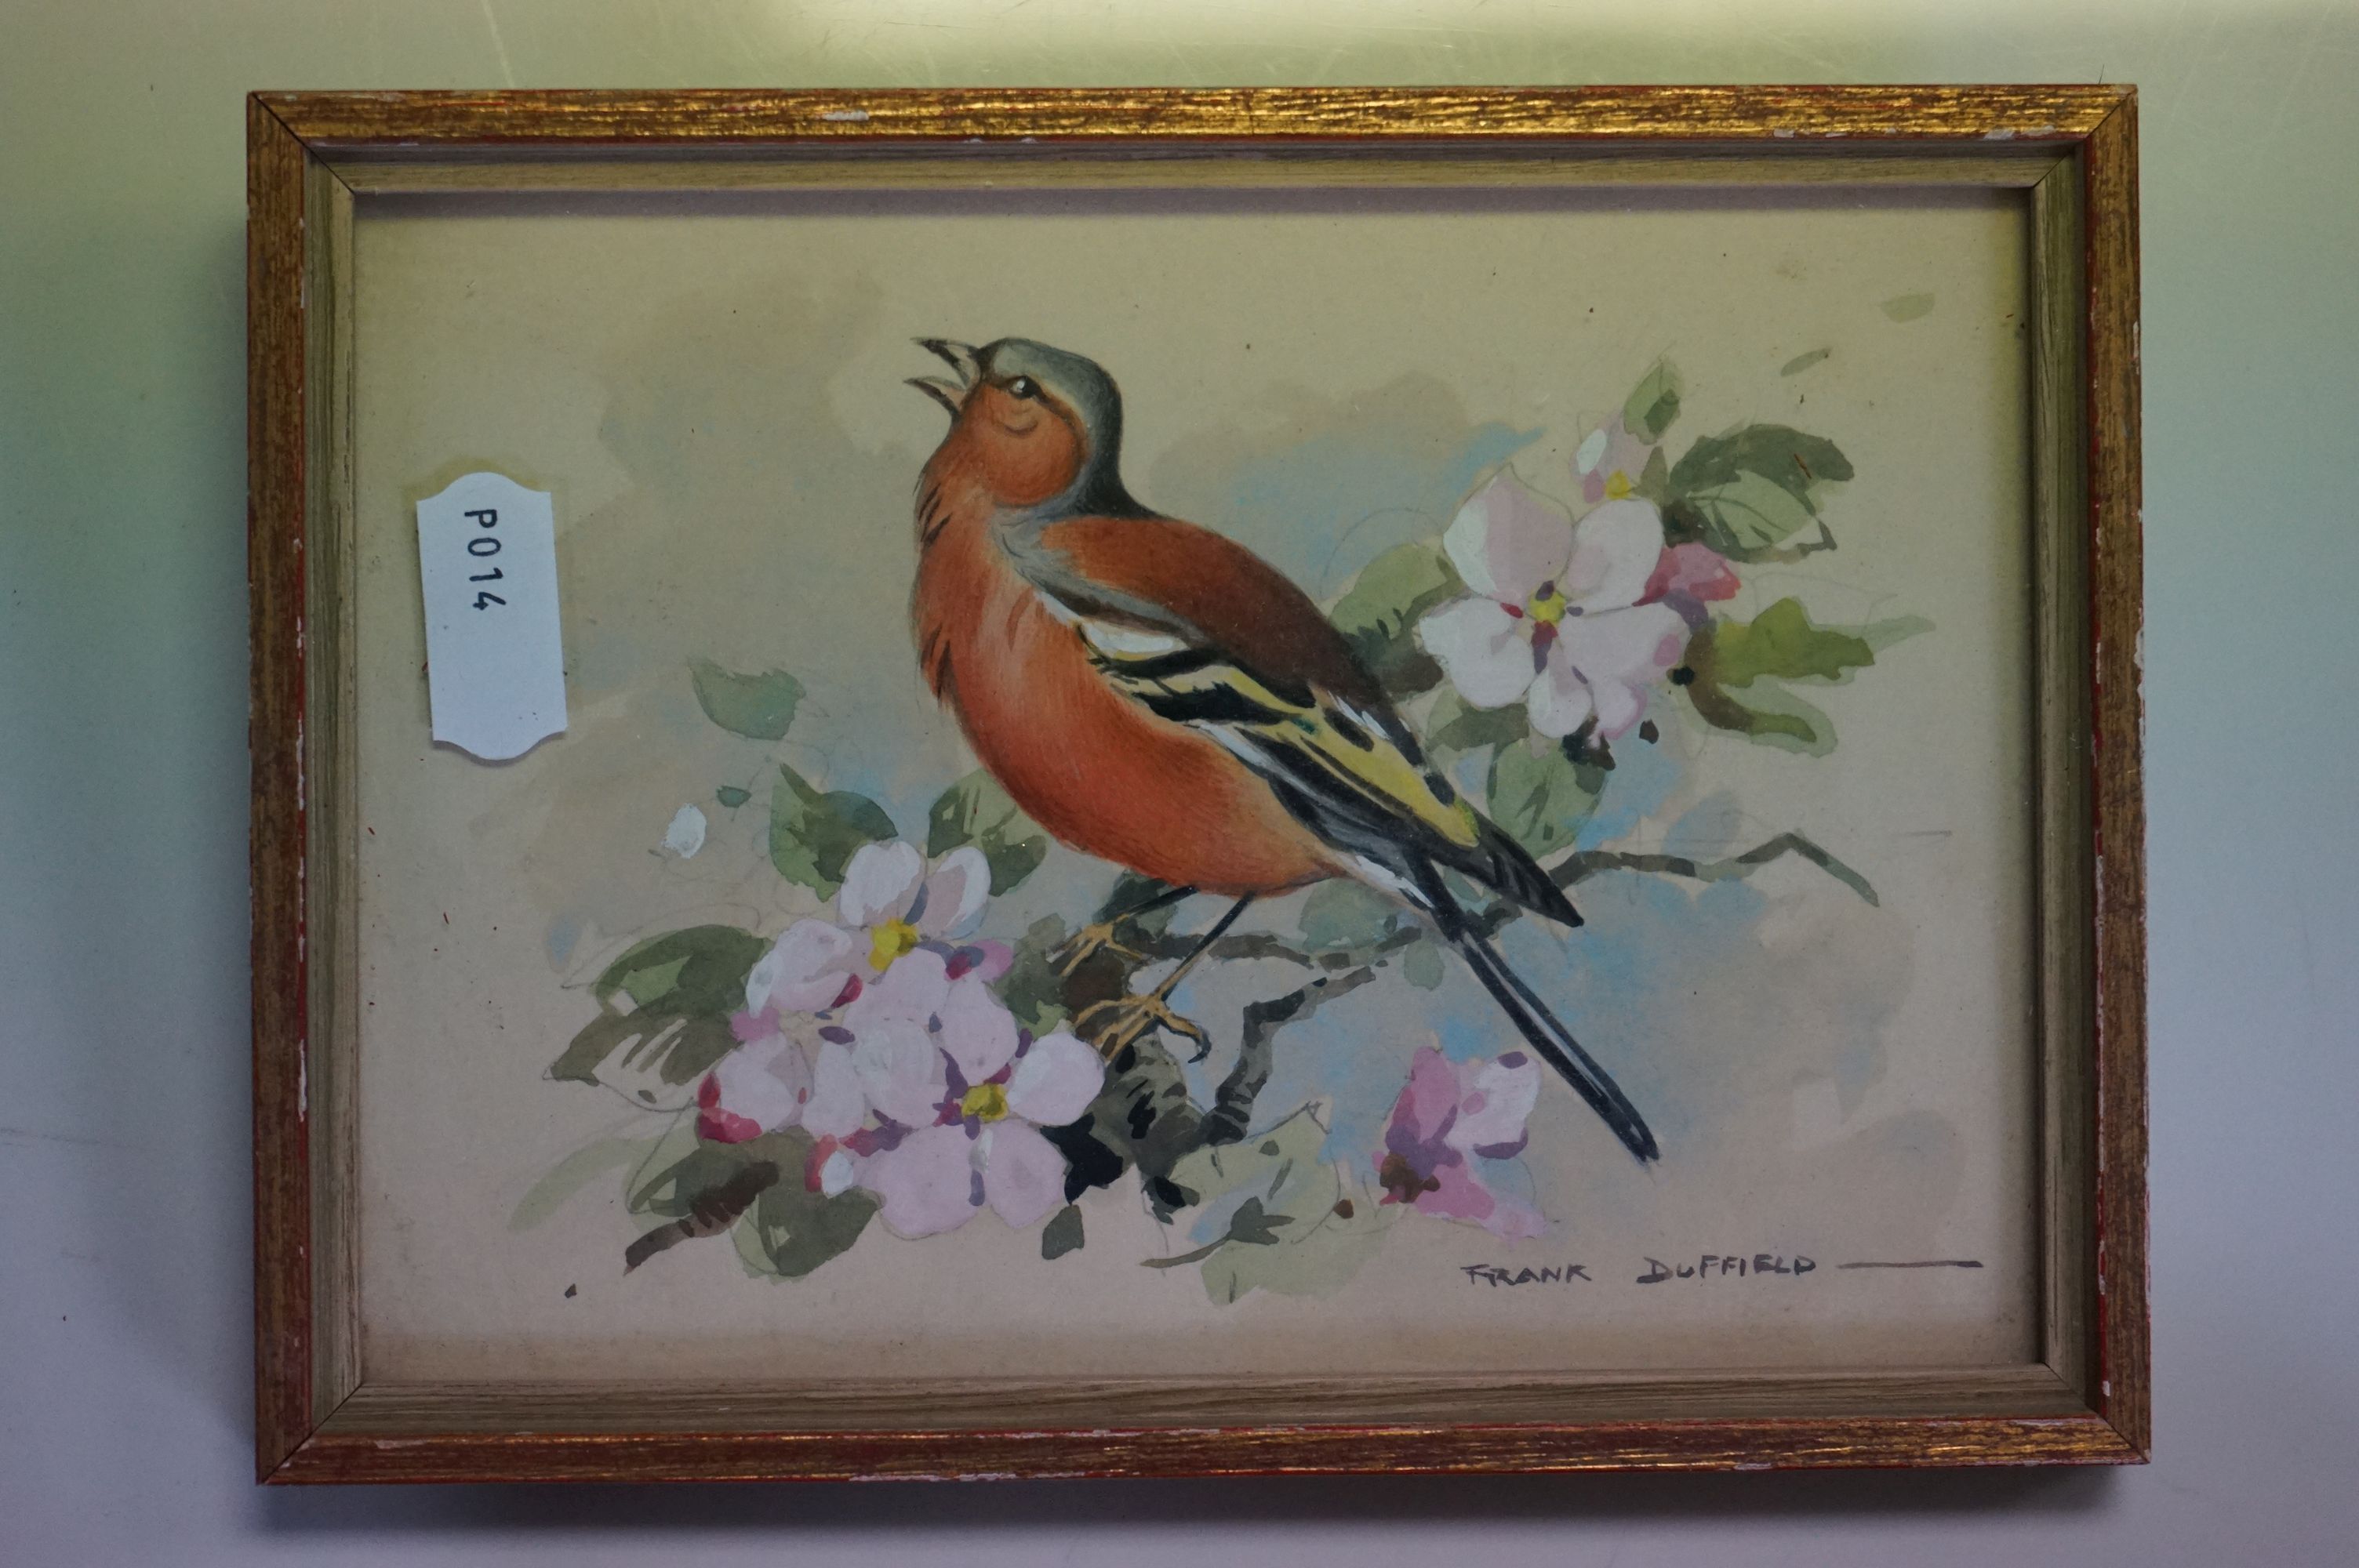 Frank Duffield (1901 - 1982 Bristol Savages), Collection of Seven Small Watercolours including Birds - Image 3 of 12